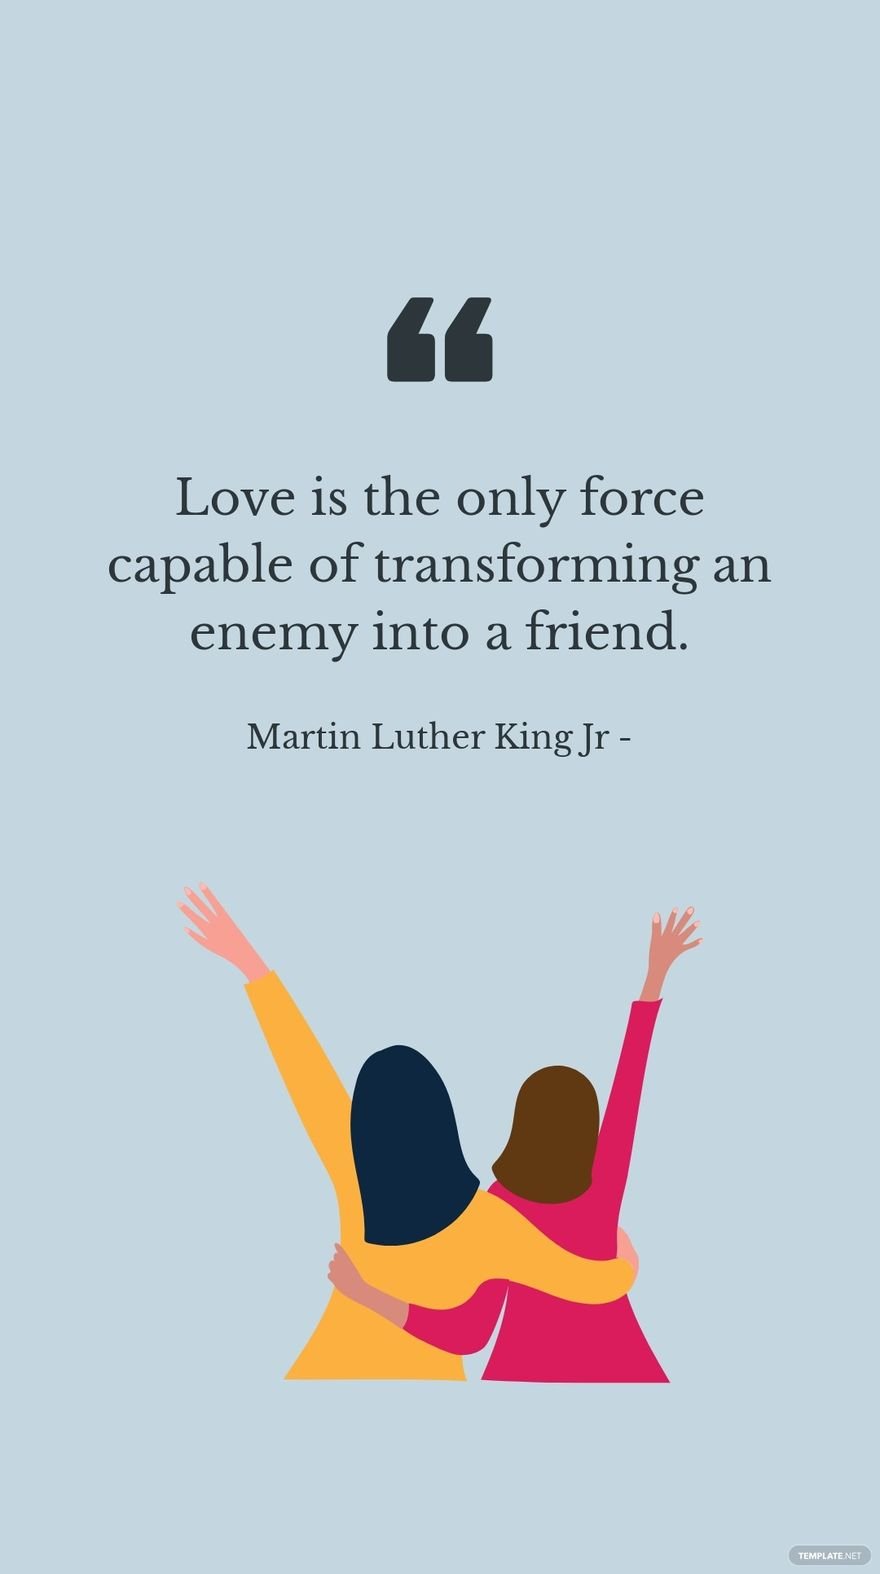 Martin Luther King, Jr - Love is the only force capable of transforming an enemy into a friend.